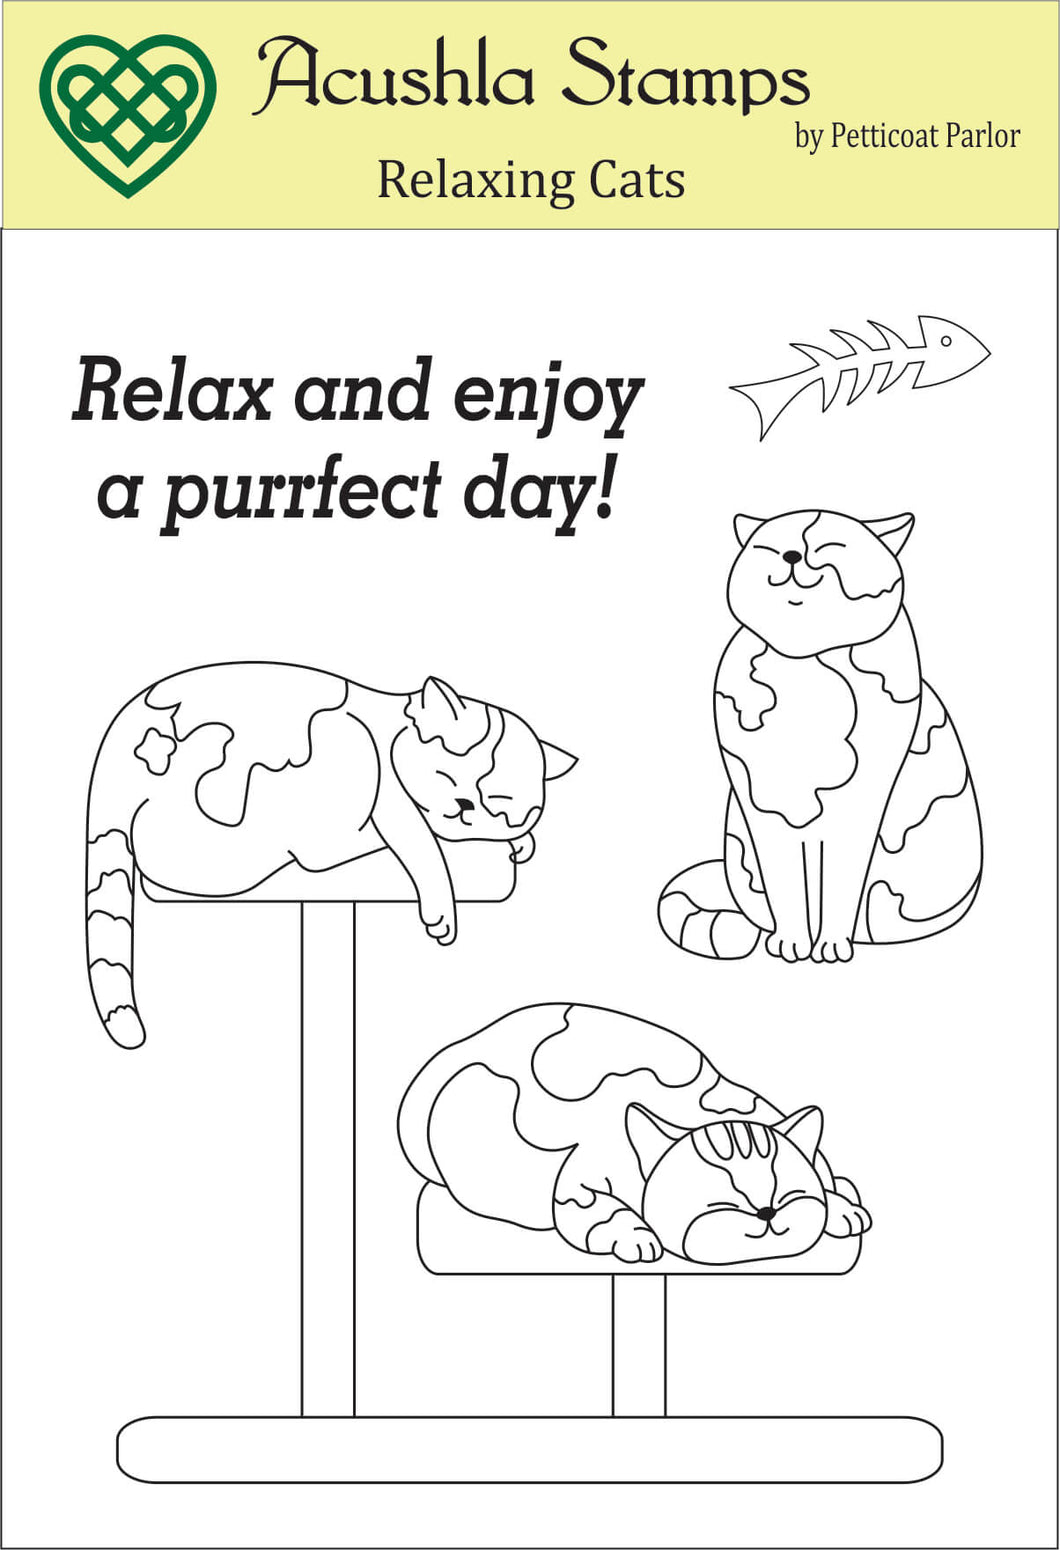 Acushla Stamps by Petticoat Parlor - Relaxing Cats